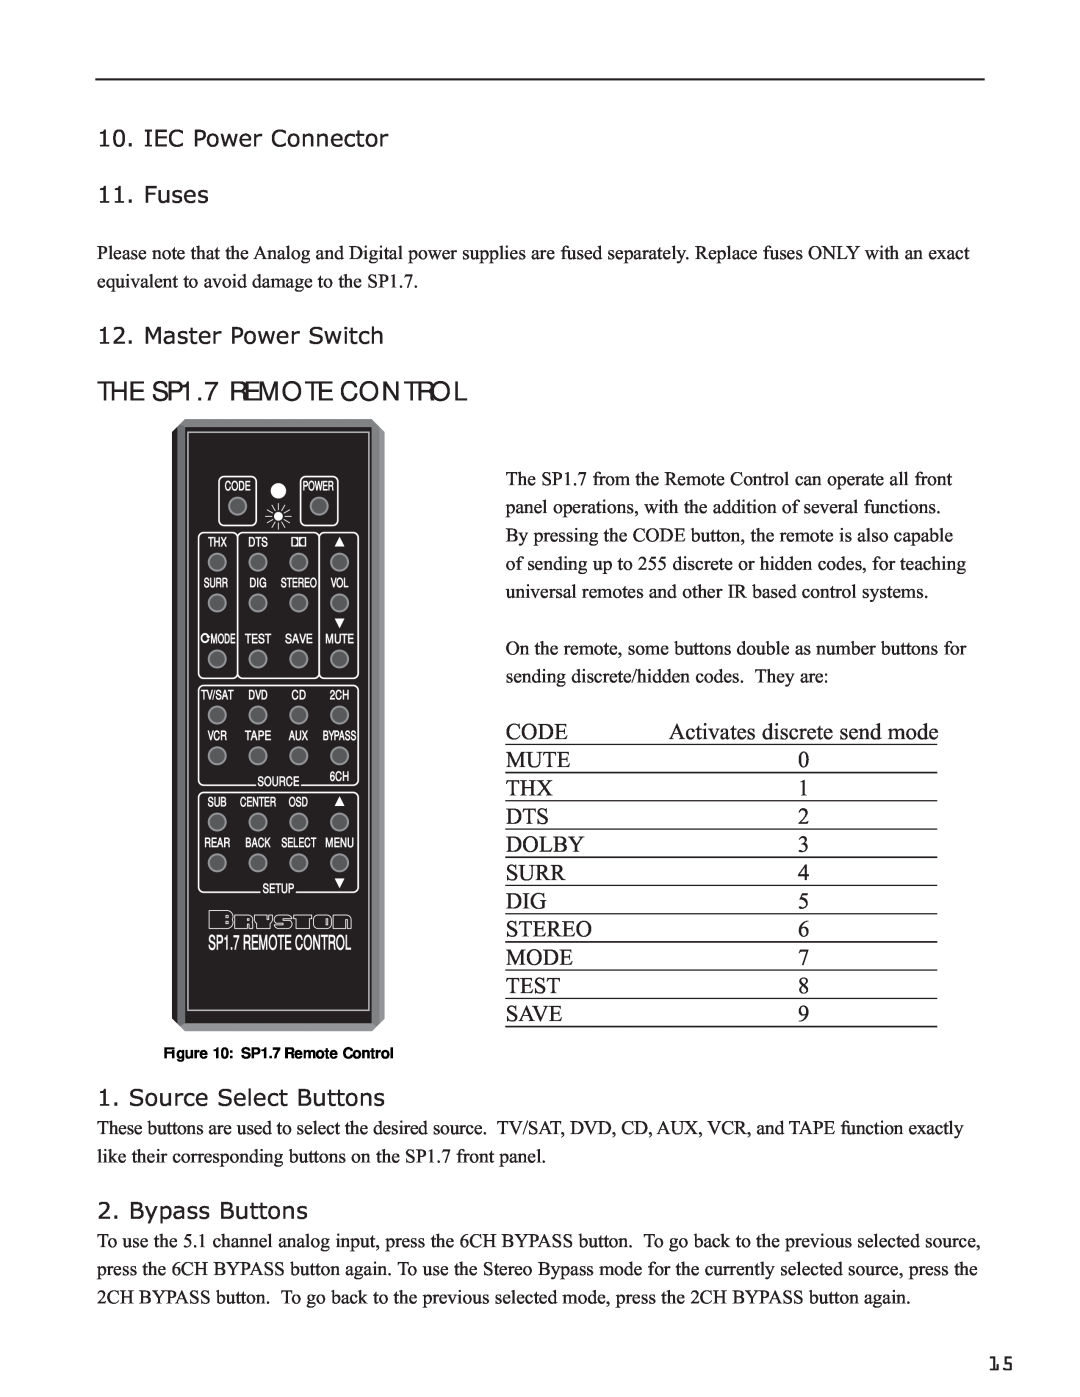 Bryston THE SP1.7 REMOTE CONTROL, IEC Power Connector 11.Fuses, Master Power Switch, Source Select Buttons, Code, Mute 